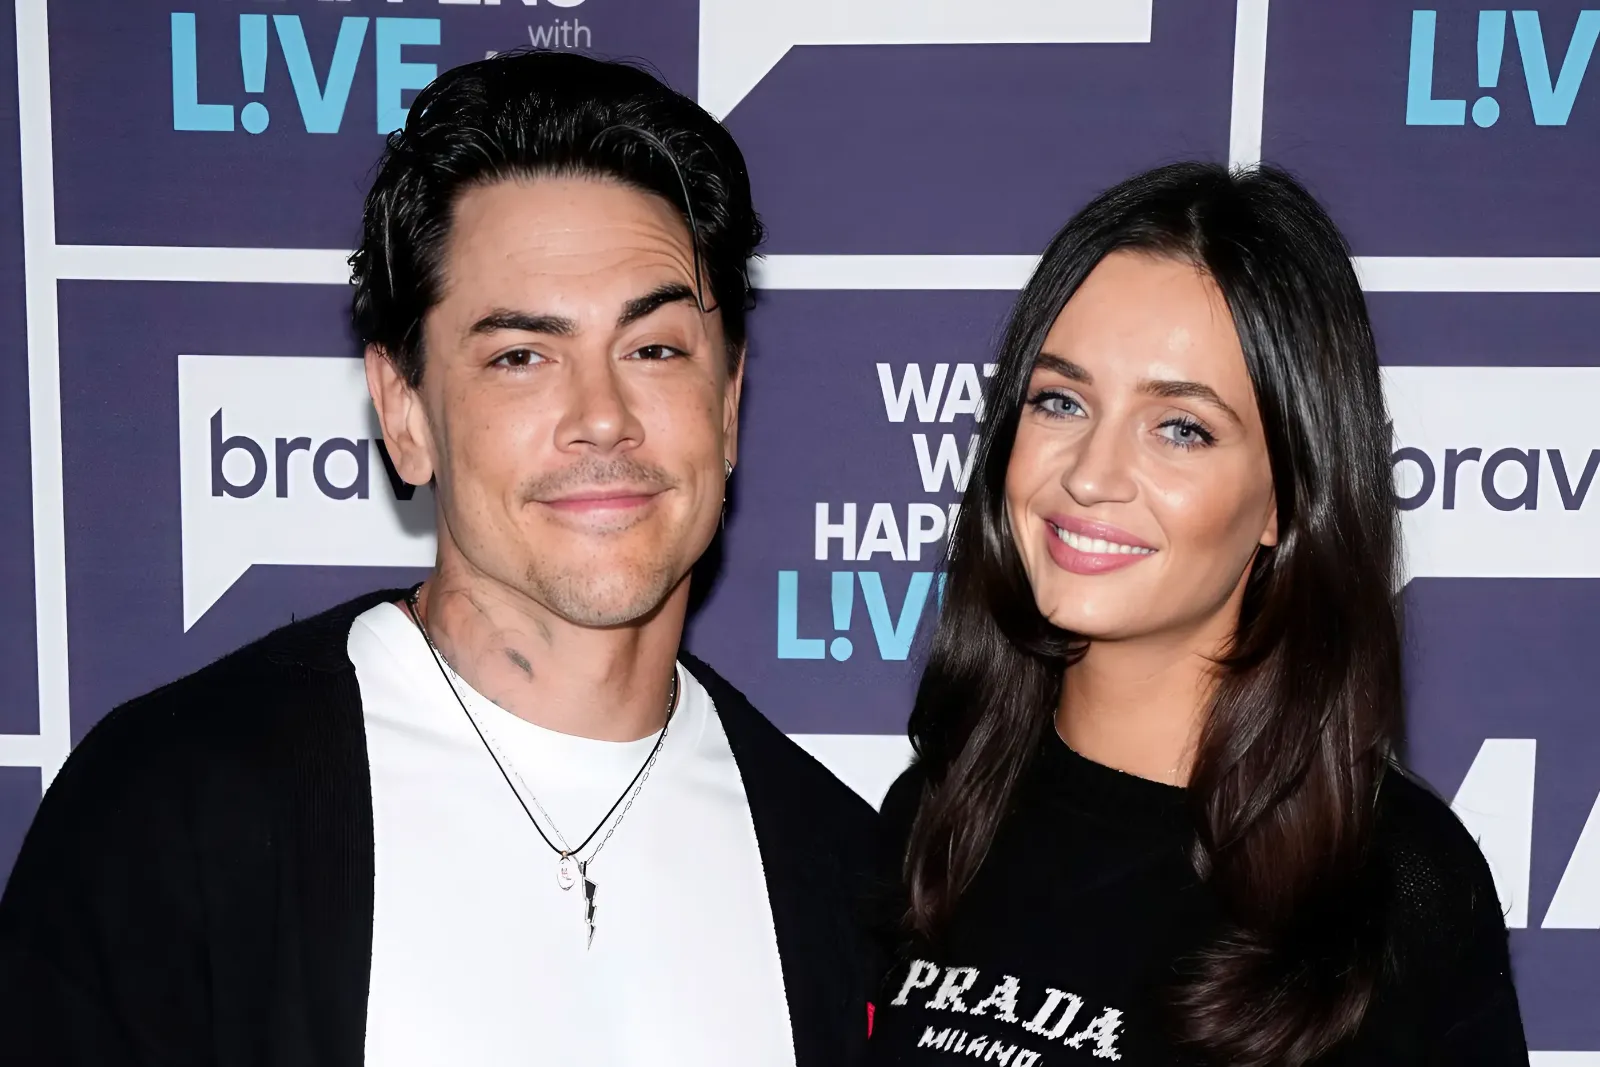 Victoria Lee Robinson Makes a Rare Statement About Dating Tom Sandoval: "Love"